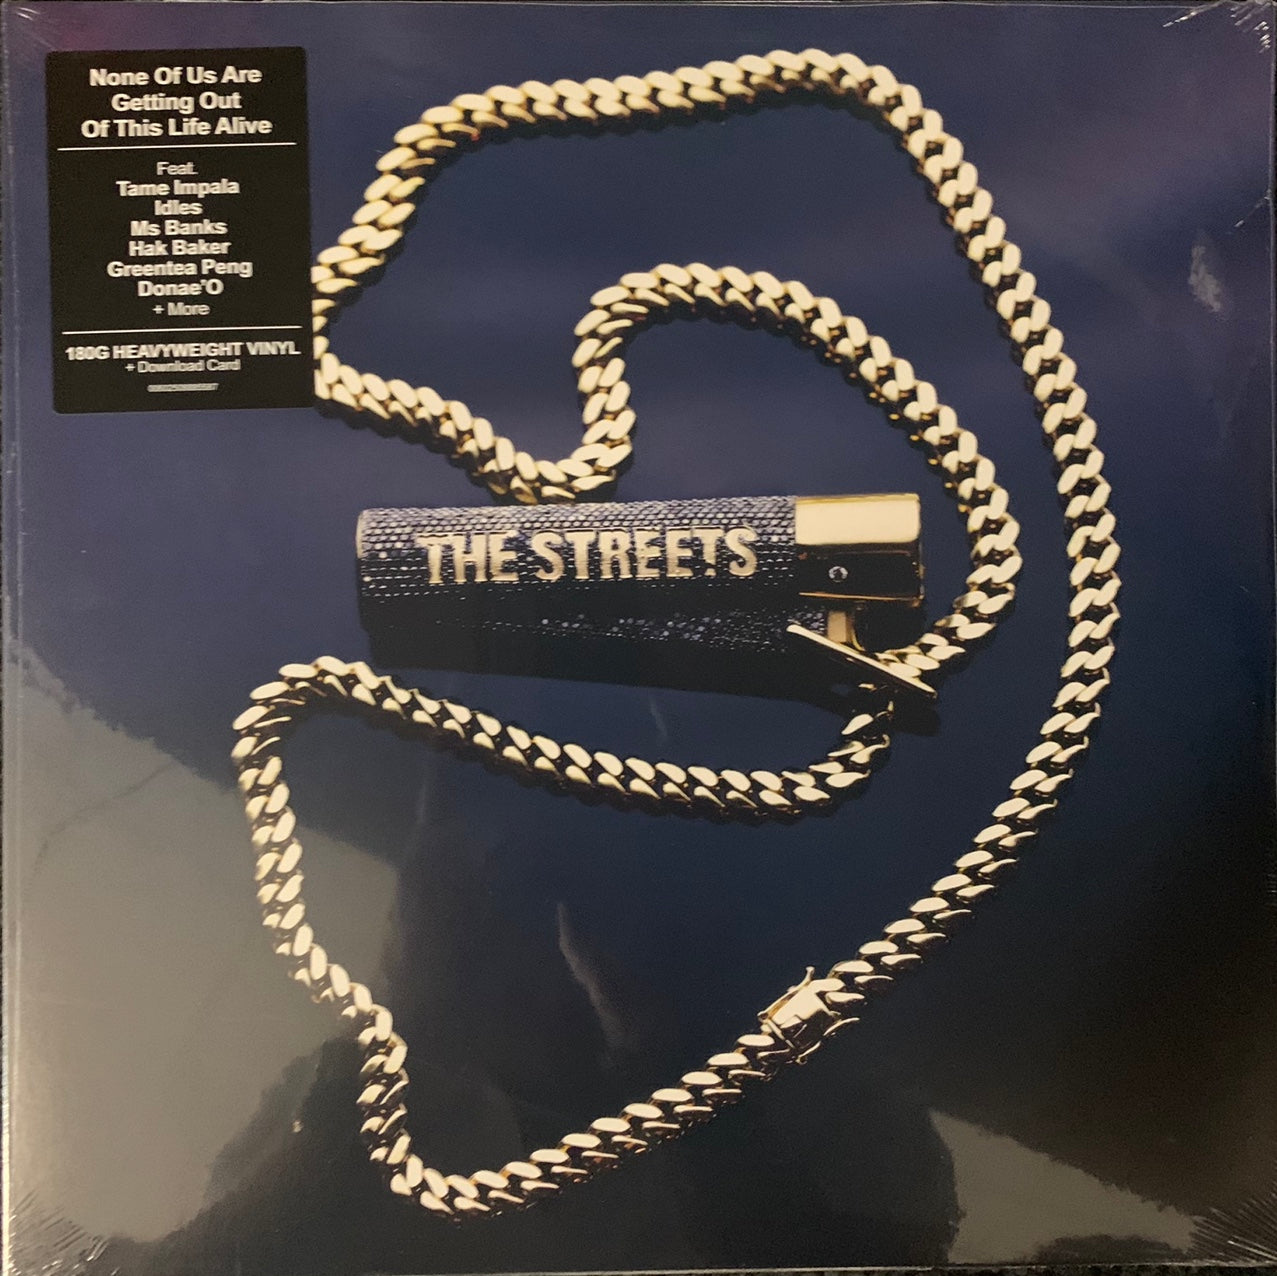 The Streets ‘None Of Us Are Getting Out Of This Life Alive’ 12 Track 2 X Vinyl Album